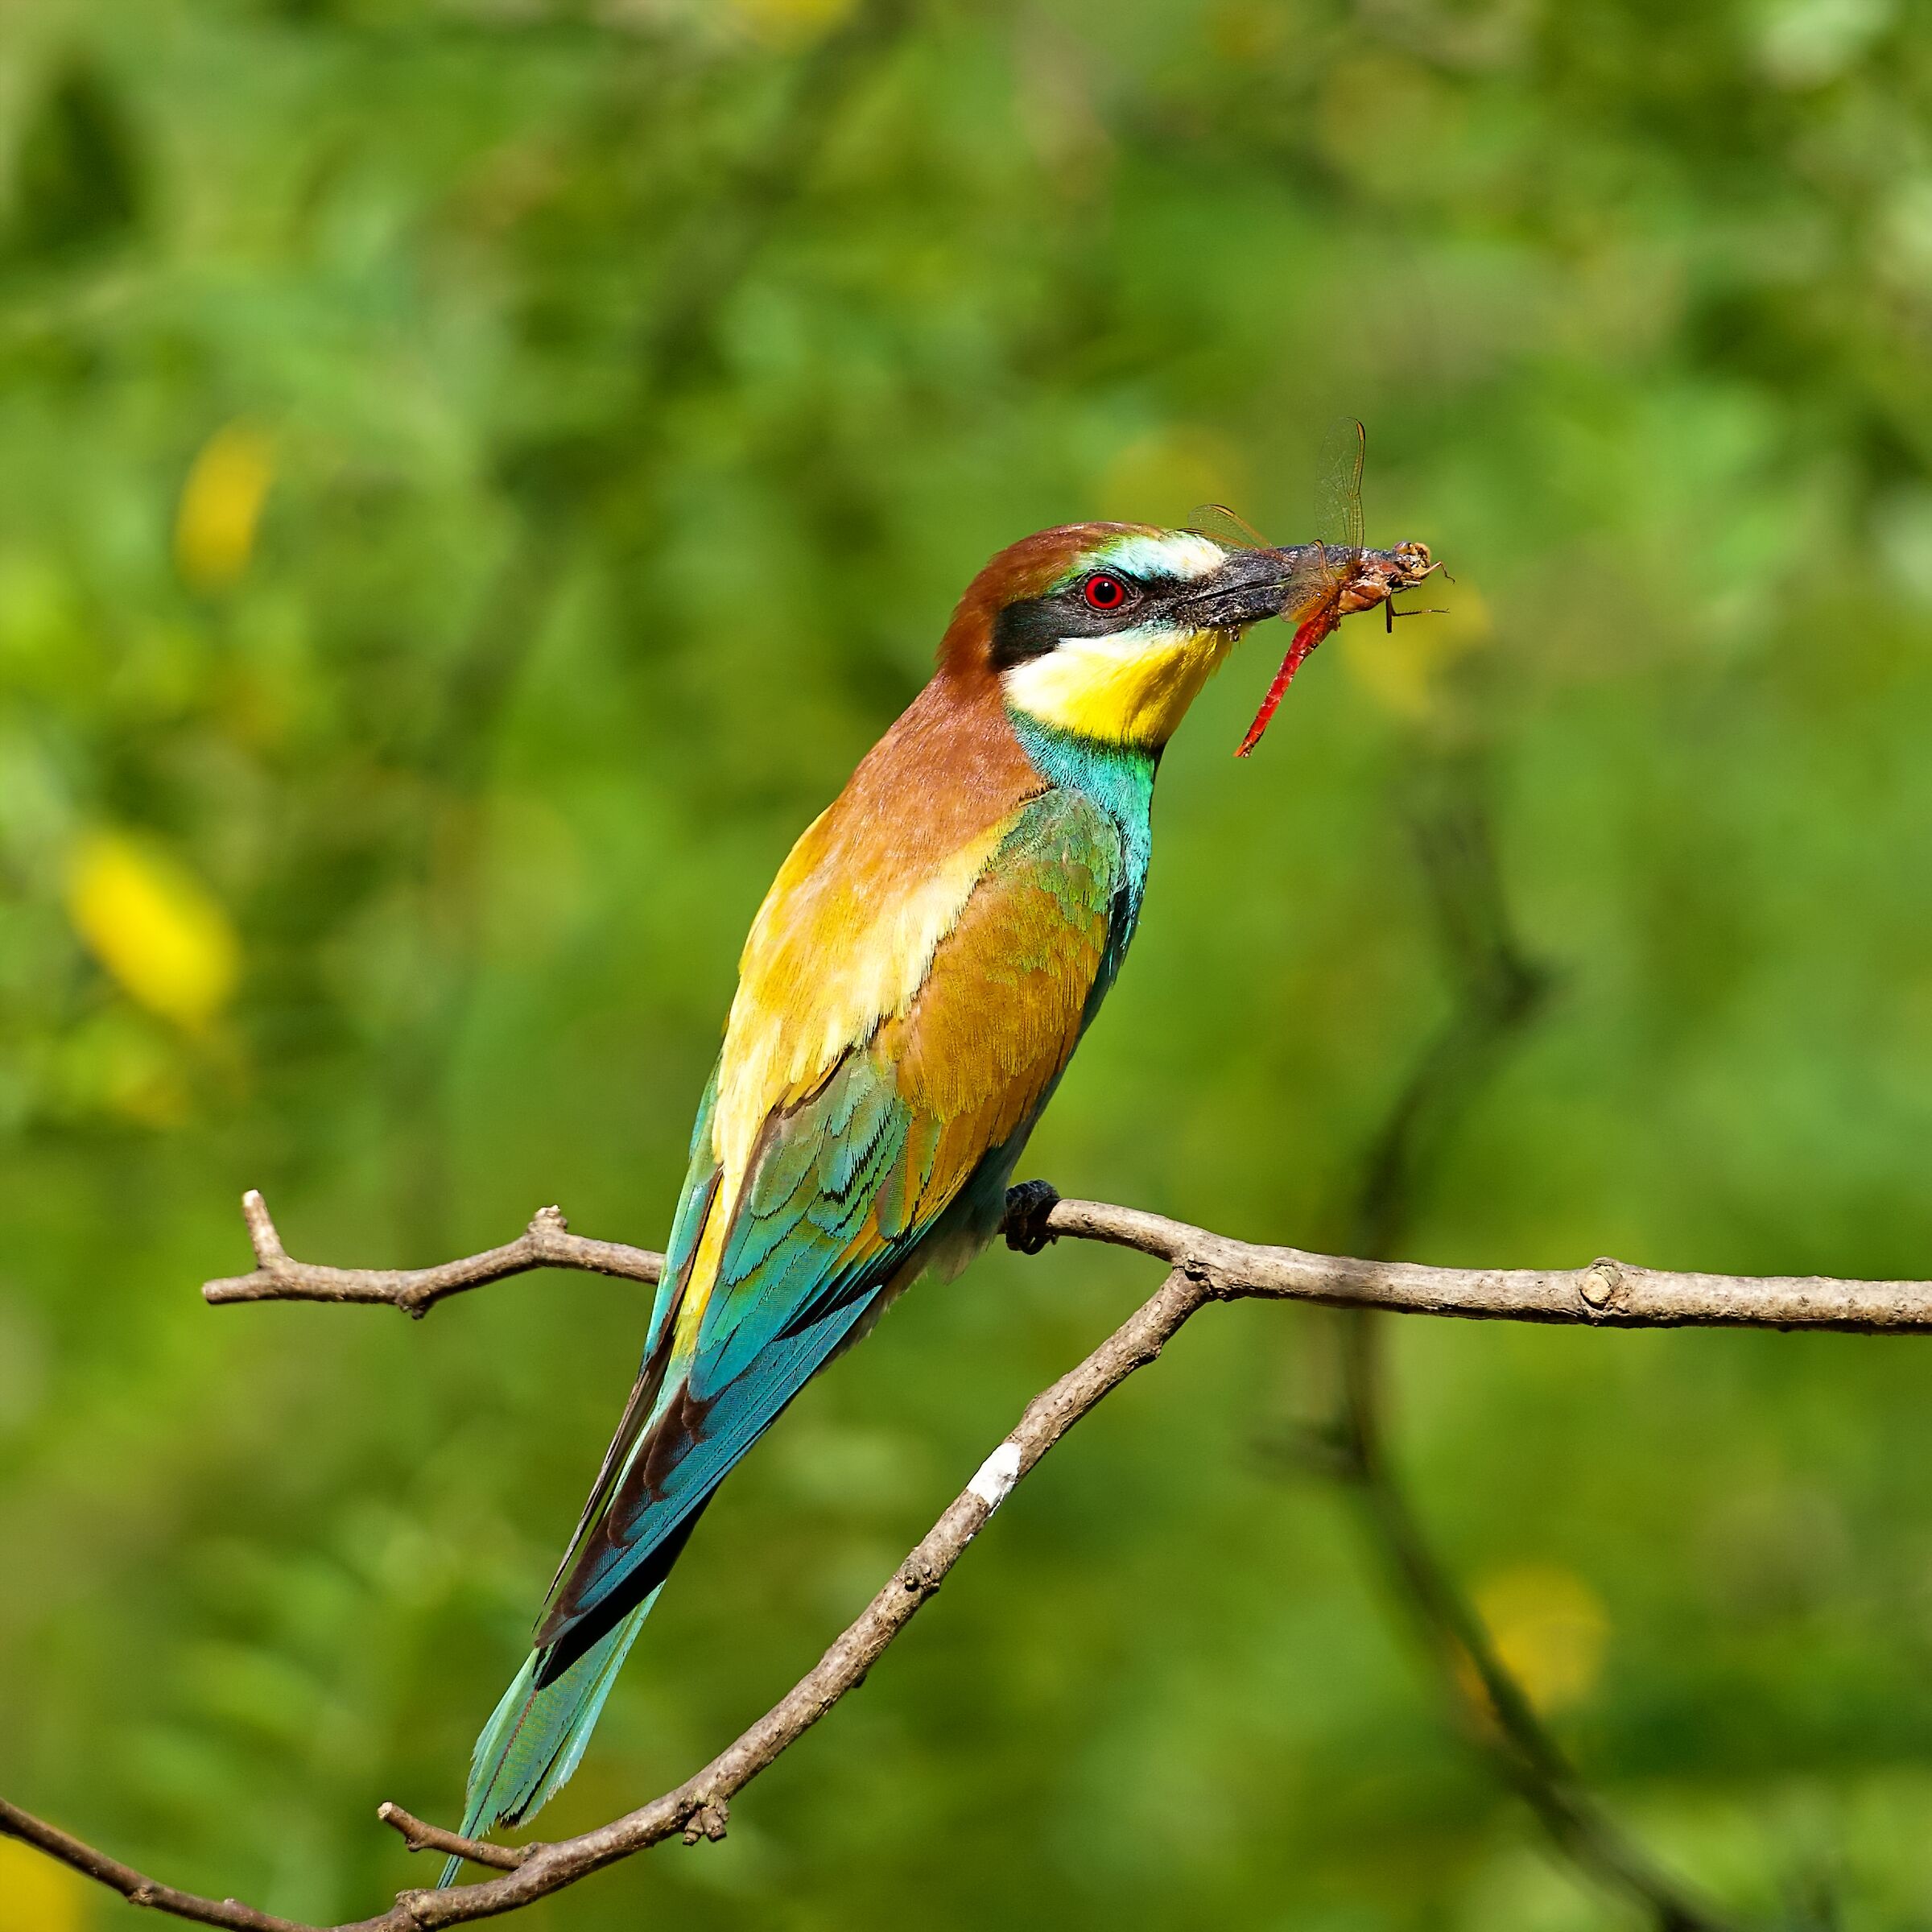 Bee-eater and its prey...